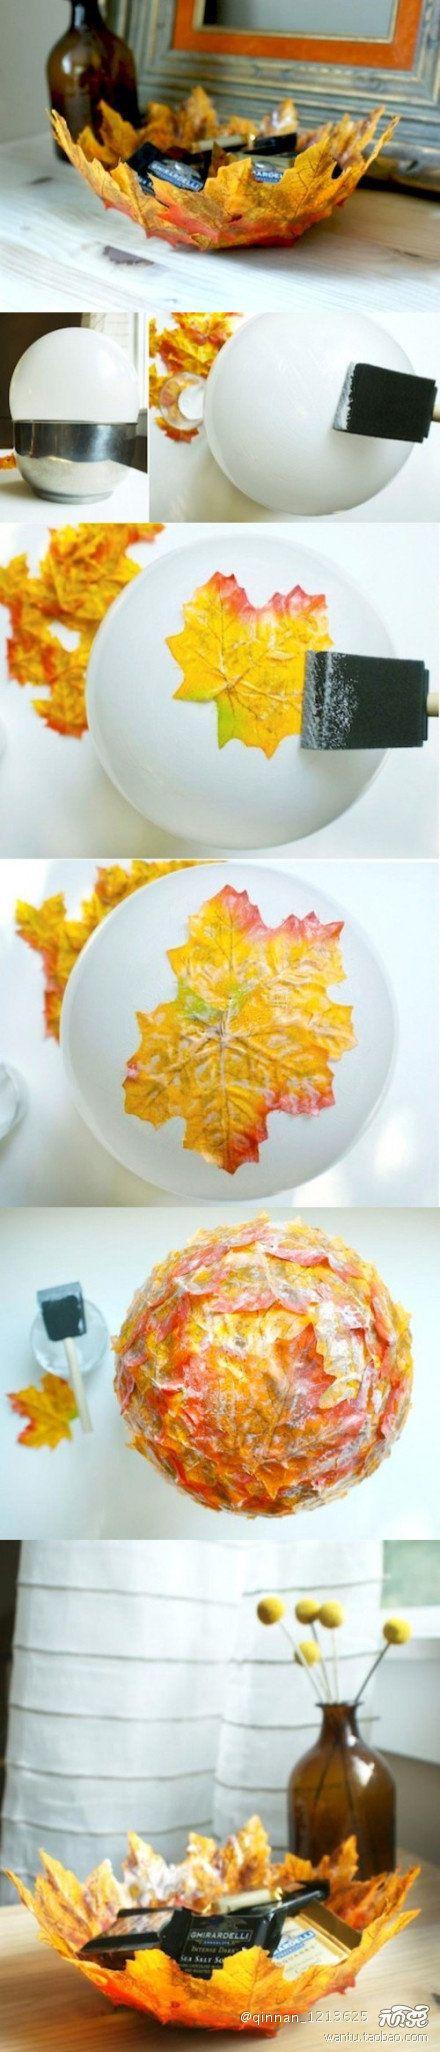 DIY Thanksgiving decoration 5 - unique bowl made of autumn leaves